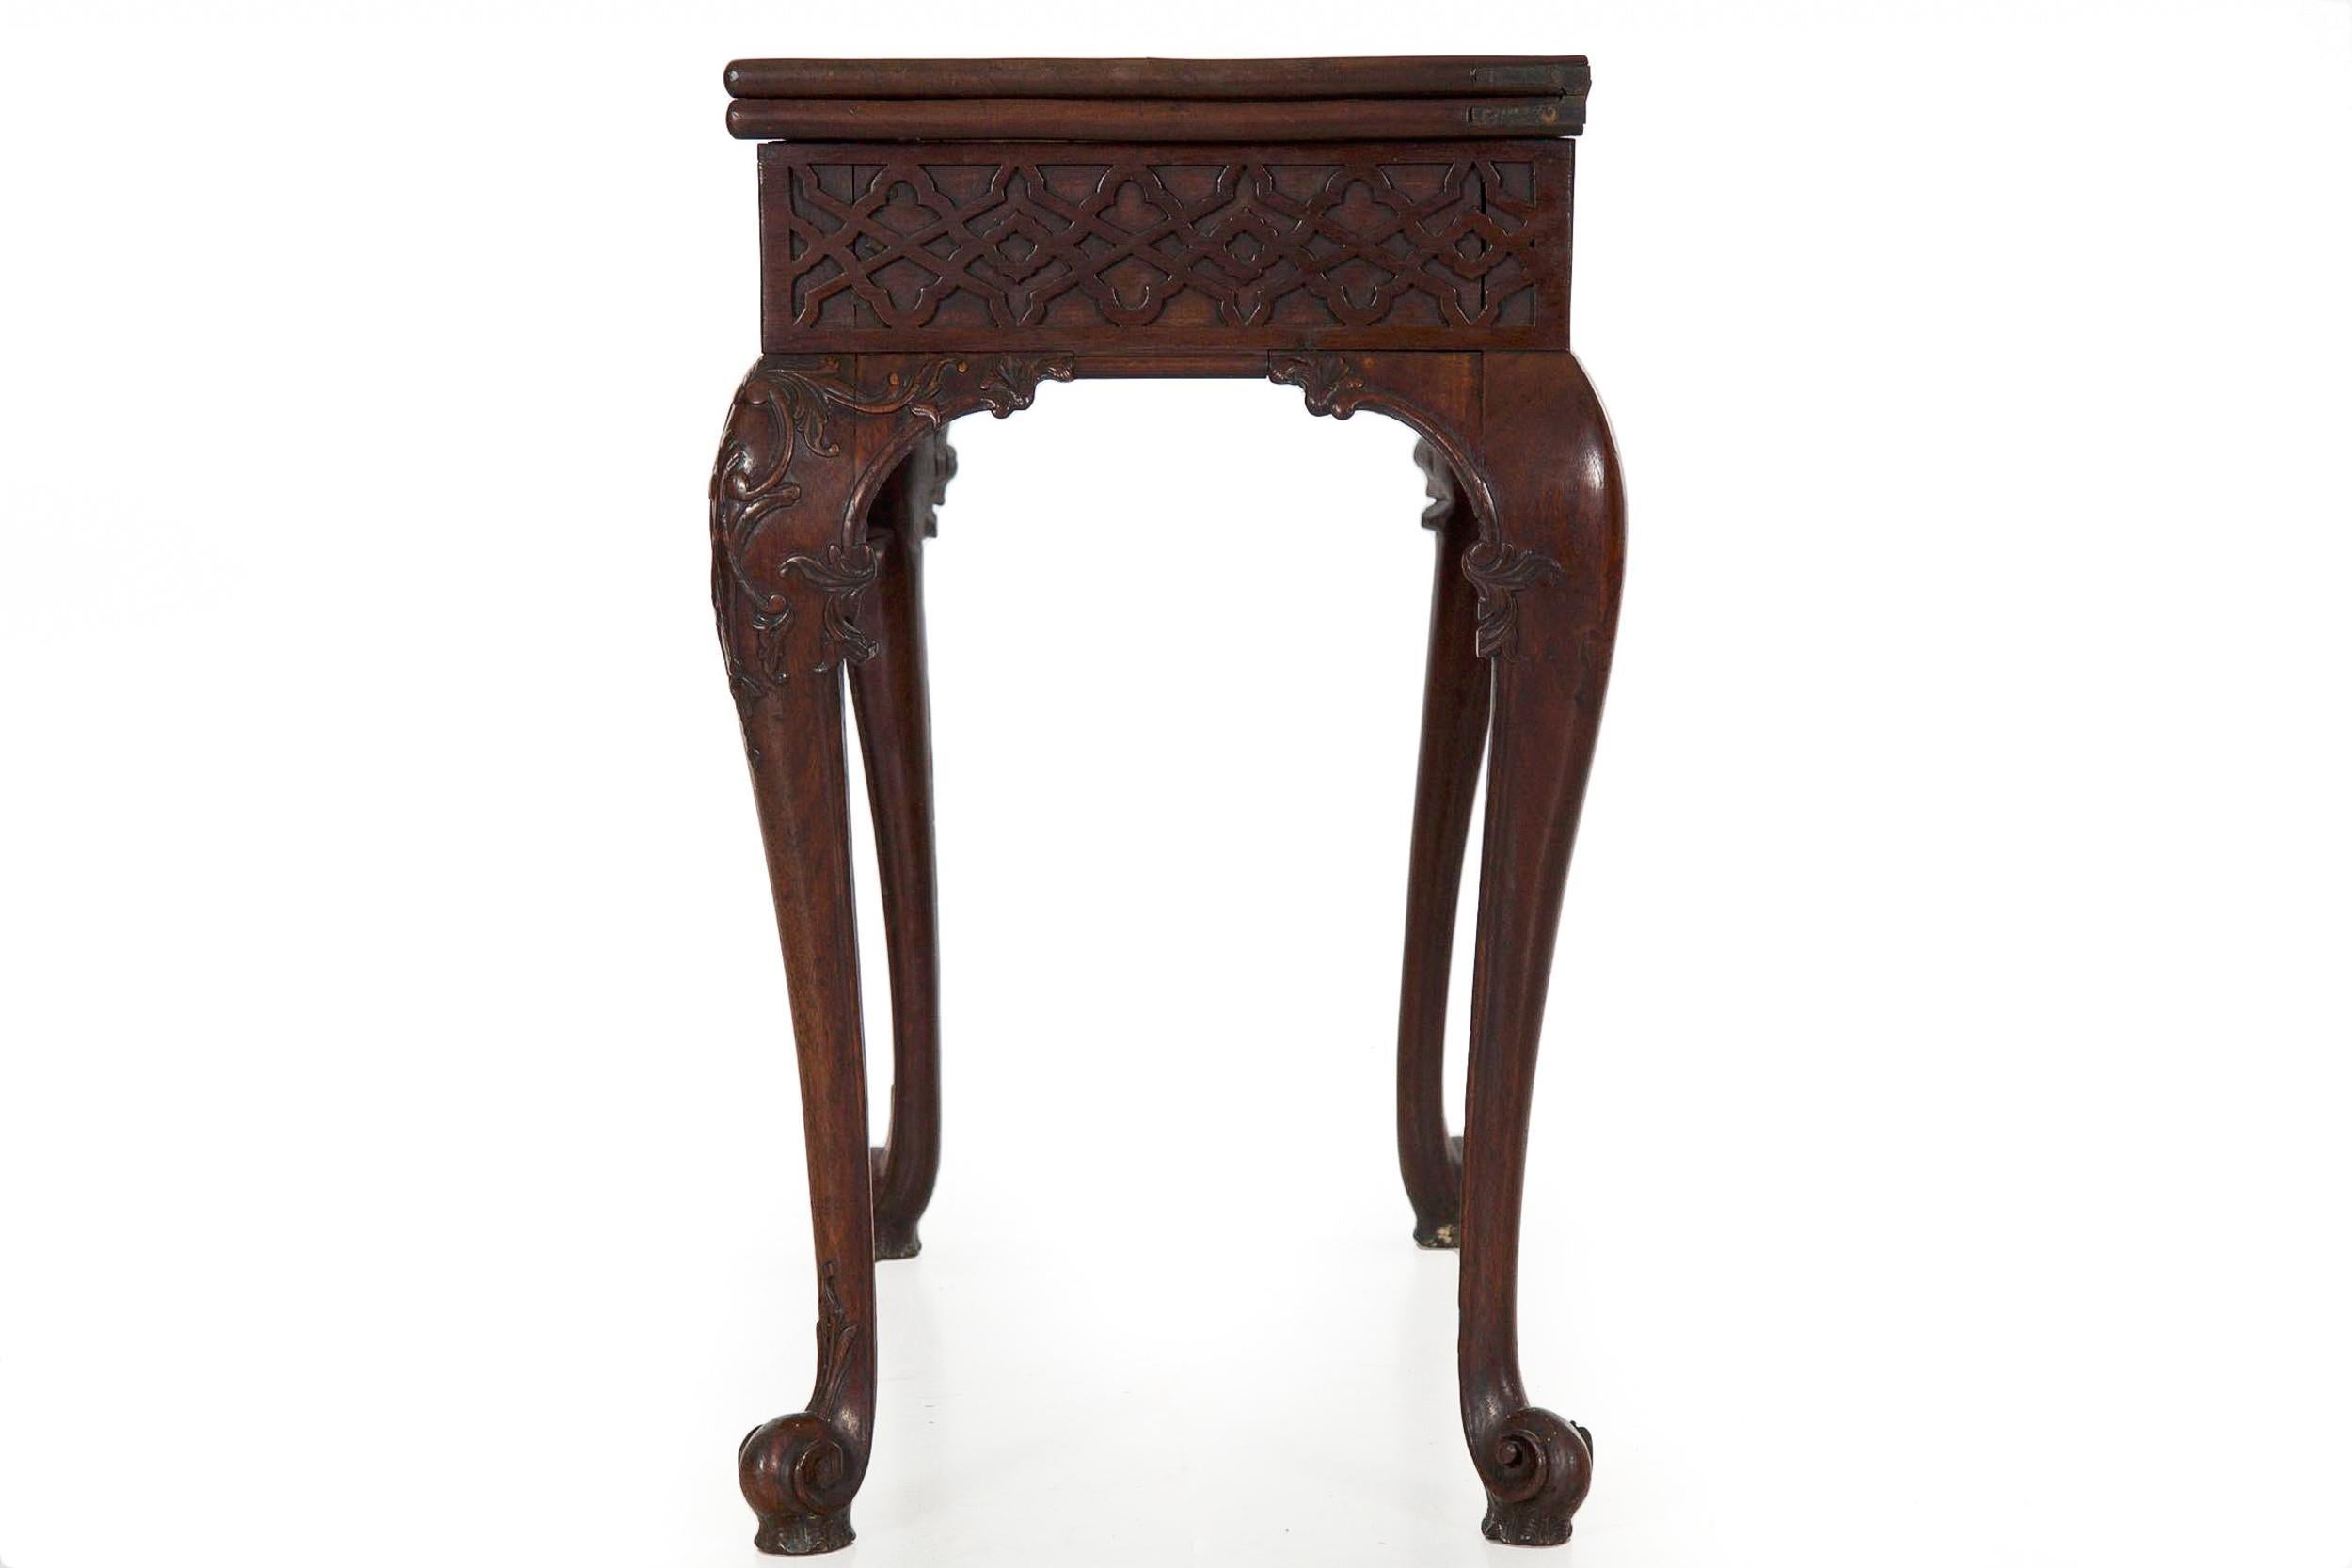 18th Century Antique English Chippendale Period Mahogany Card Games Table In Good Condition For Sale In Shippensburg, PA